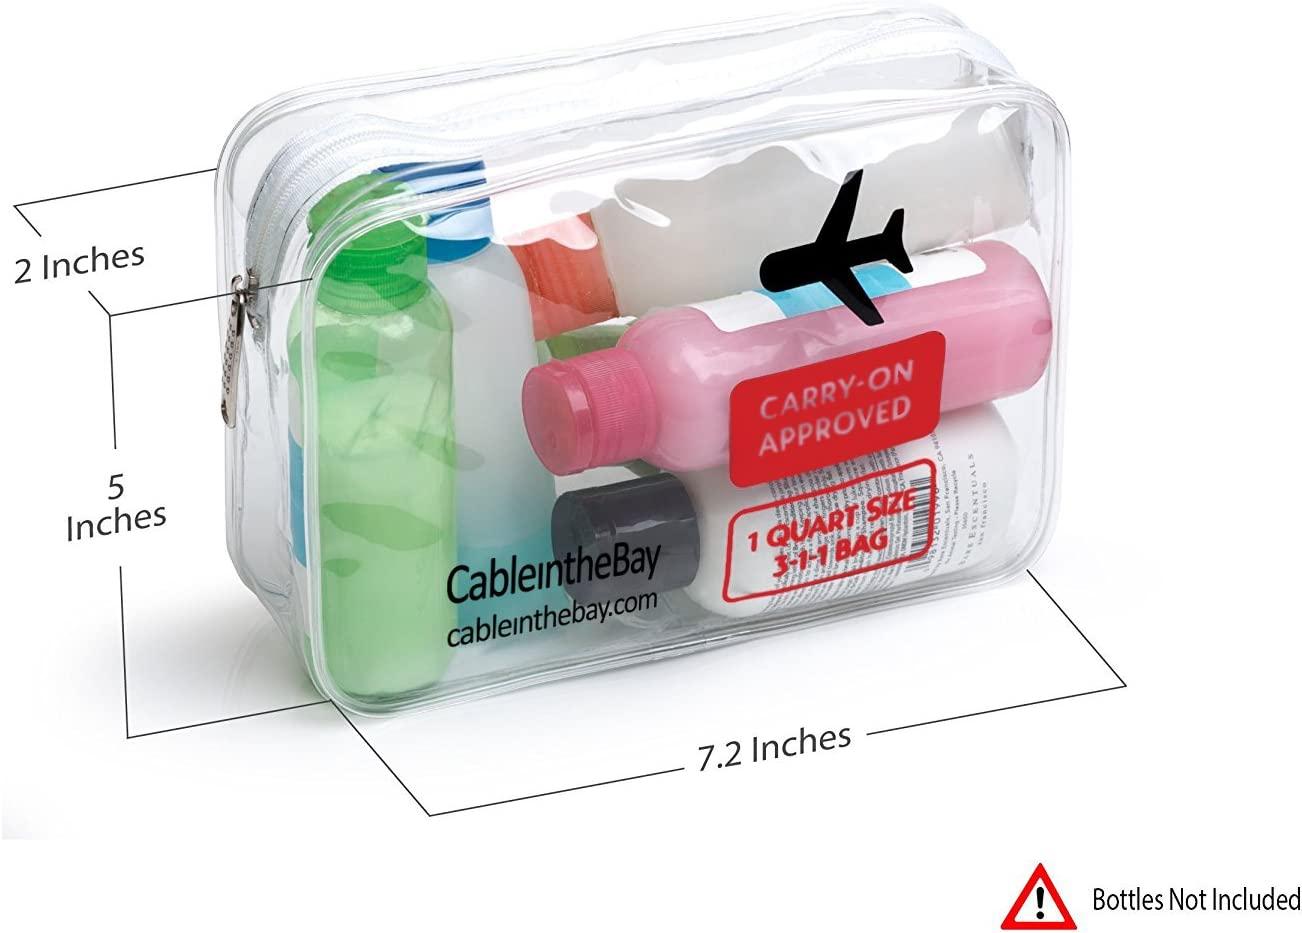 Clear Quart-Sized Zippered Pouch